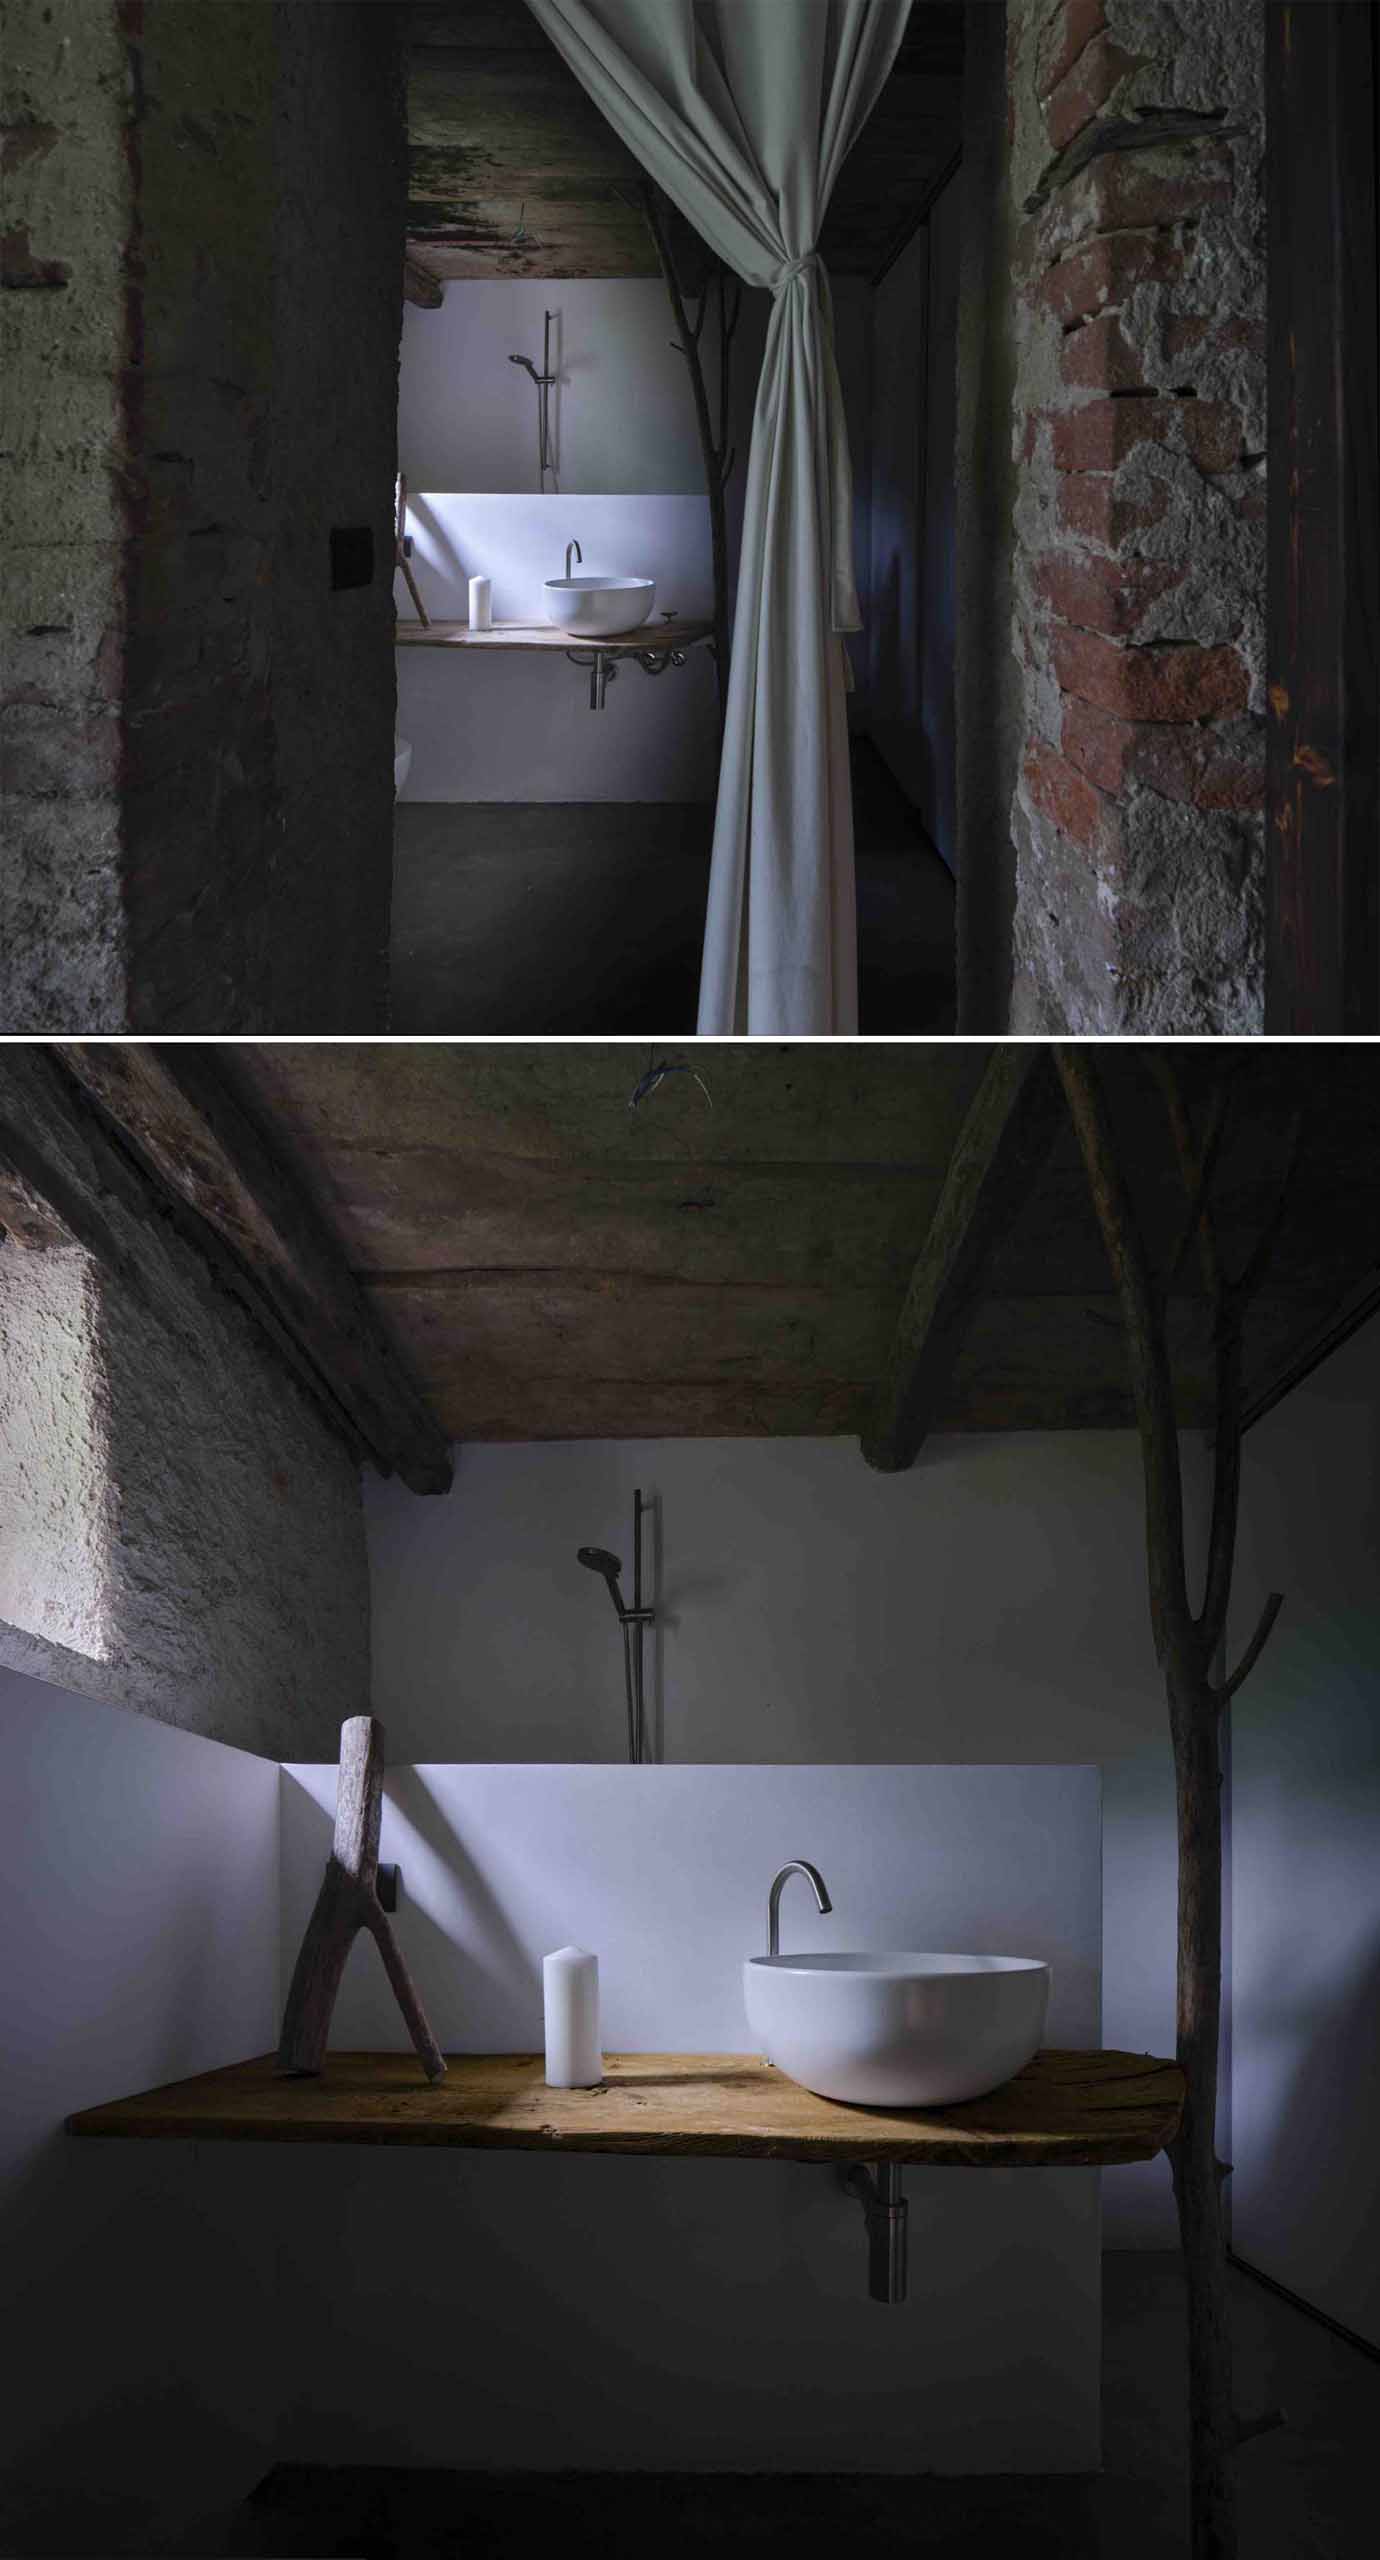 The bathroom of an off-grid home includes a vanity, toilet, and shower.